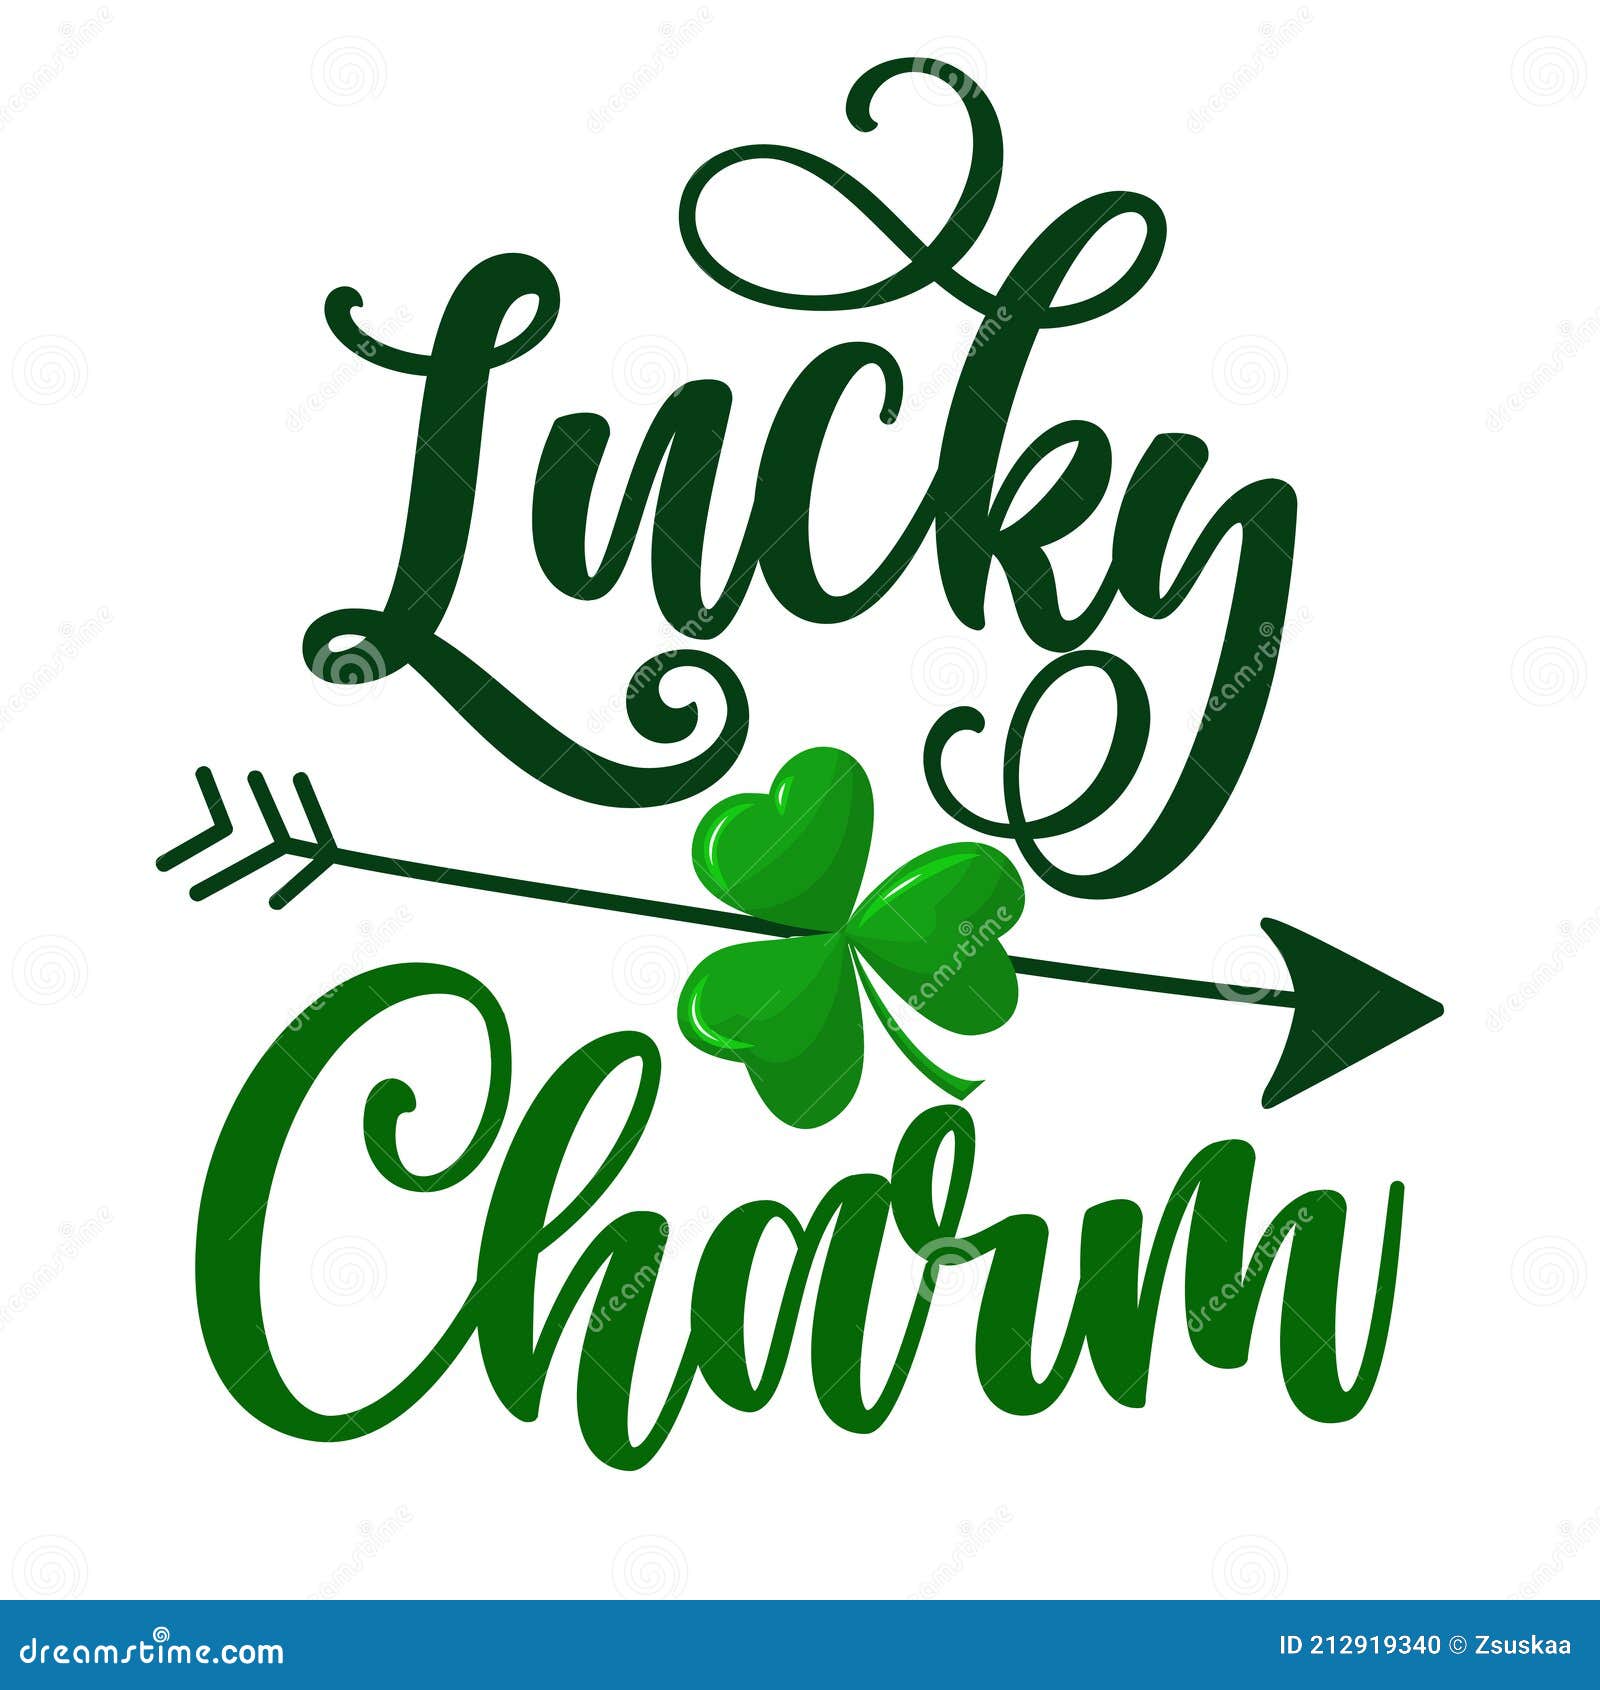 lucky charm - funny st patrick`s day